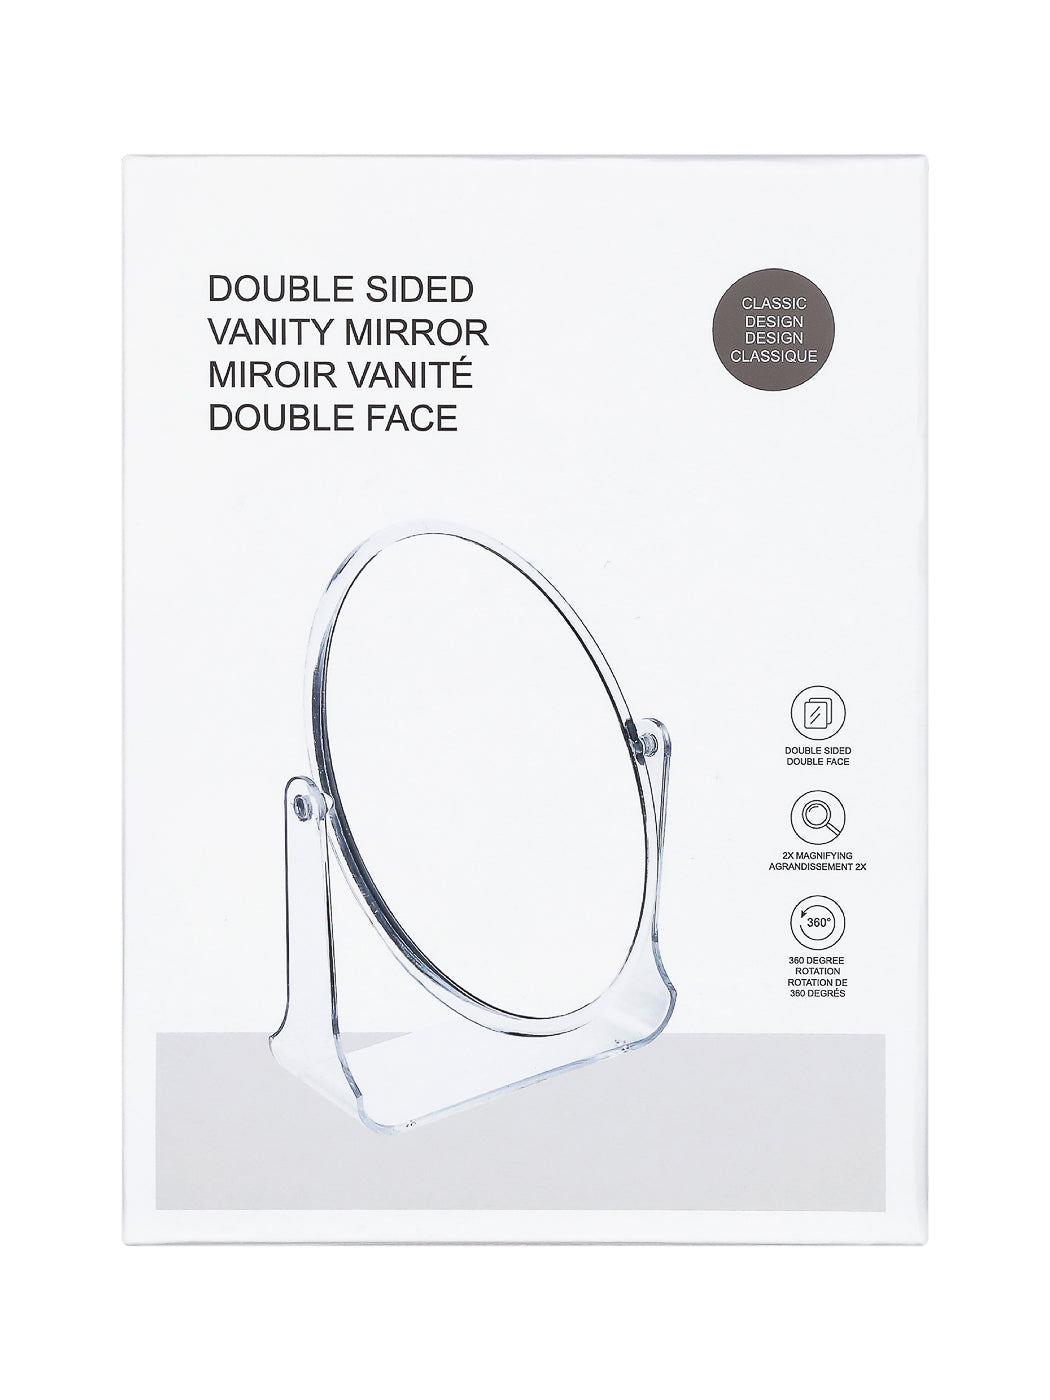 MINISO OVAL DOUBLE SIDED ROTATION VANITY MIRROR (2×MAGNIFICATION) 2010216810100 TABLE MIRROR-4